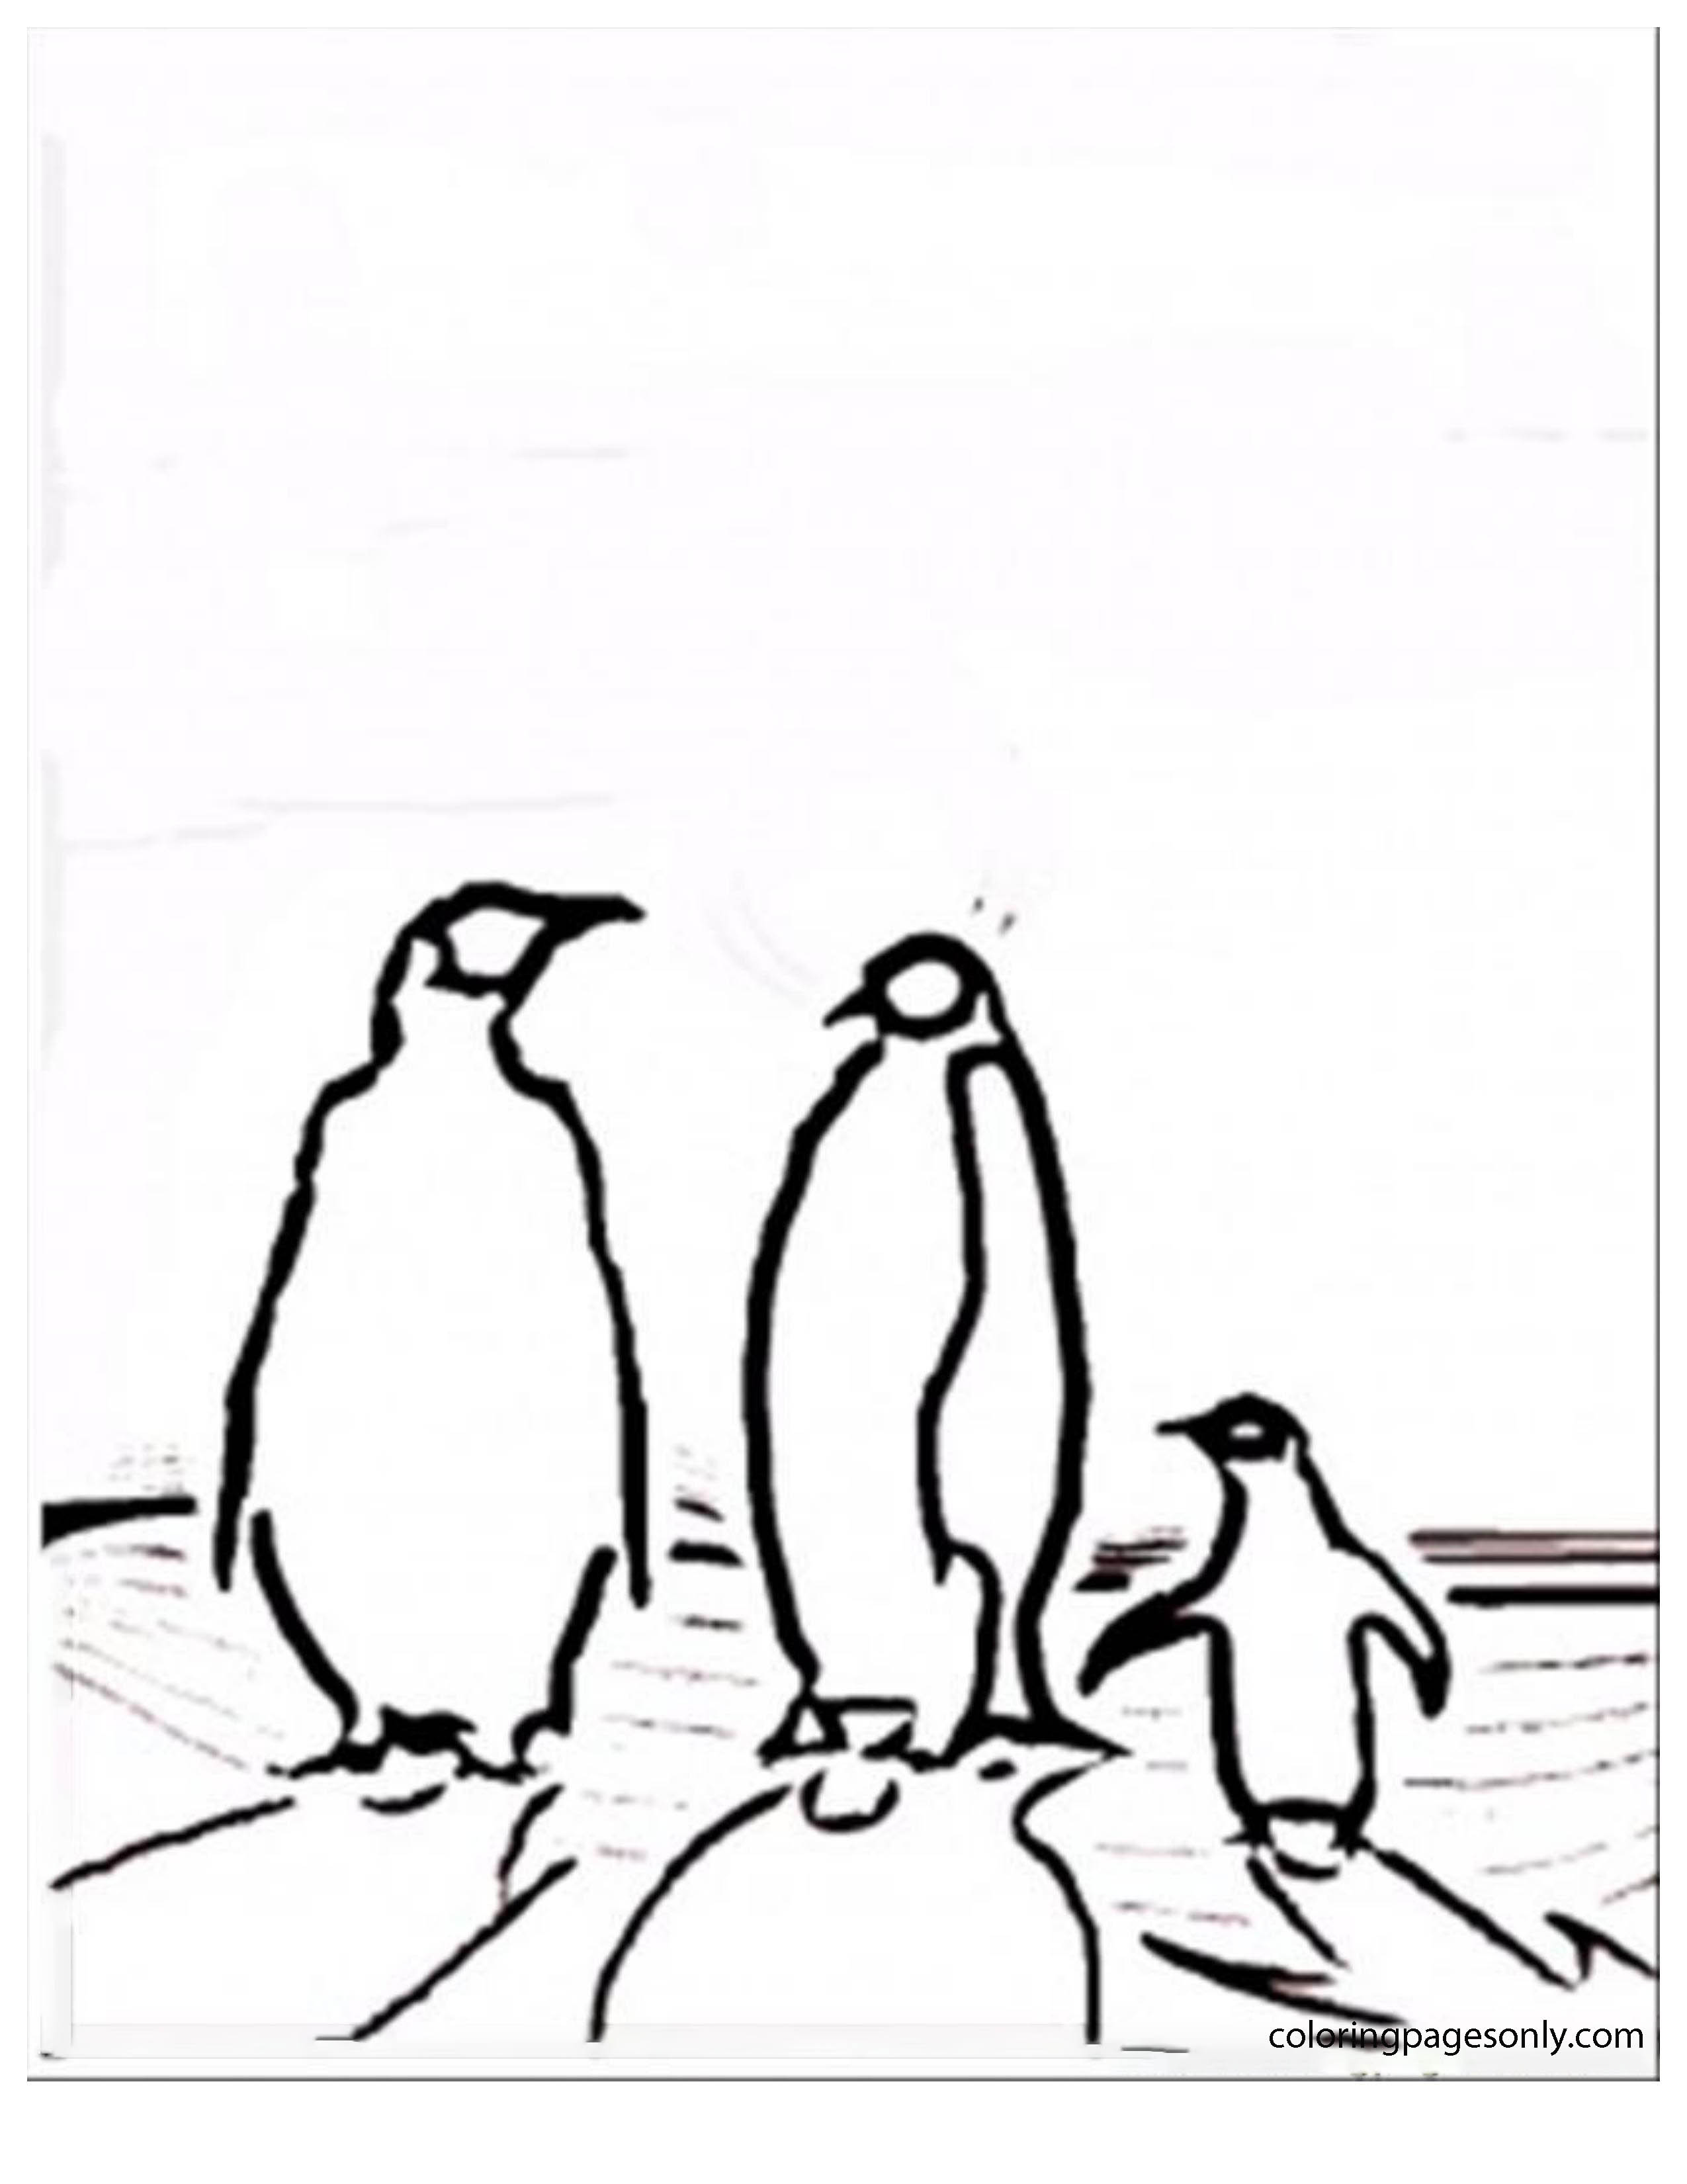 Family of penguins from North And South Poles